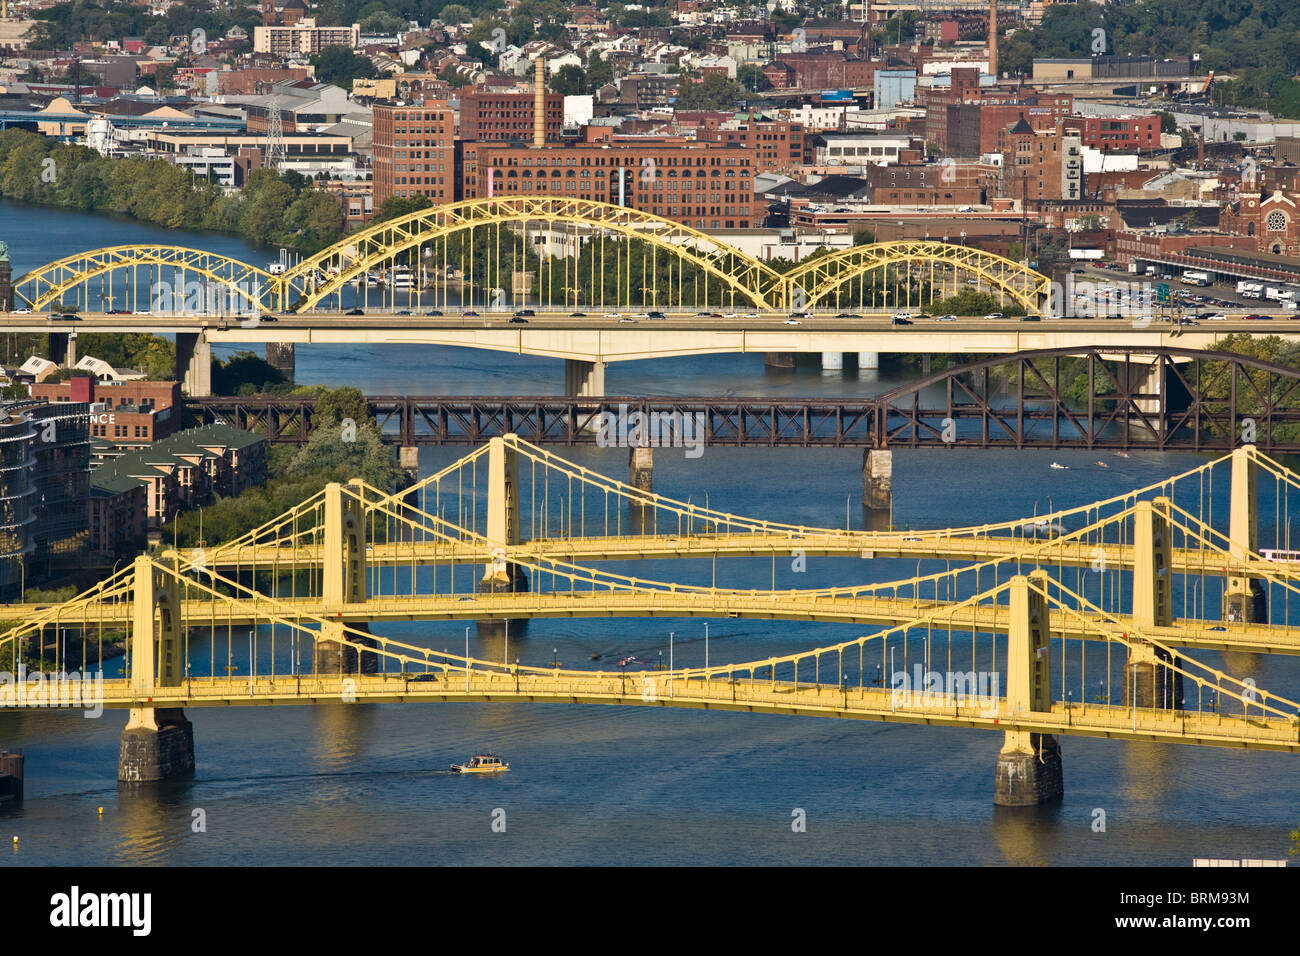 The Three Sisters Bridges in Pittsburgh, Pennsylvania crossing Allegheny R. are Roberto Clemente, Andy Warhol and Rachel Carson. Stock Photo